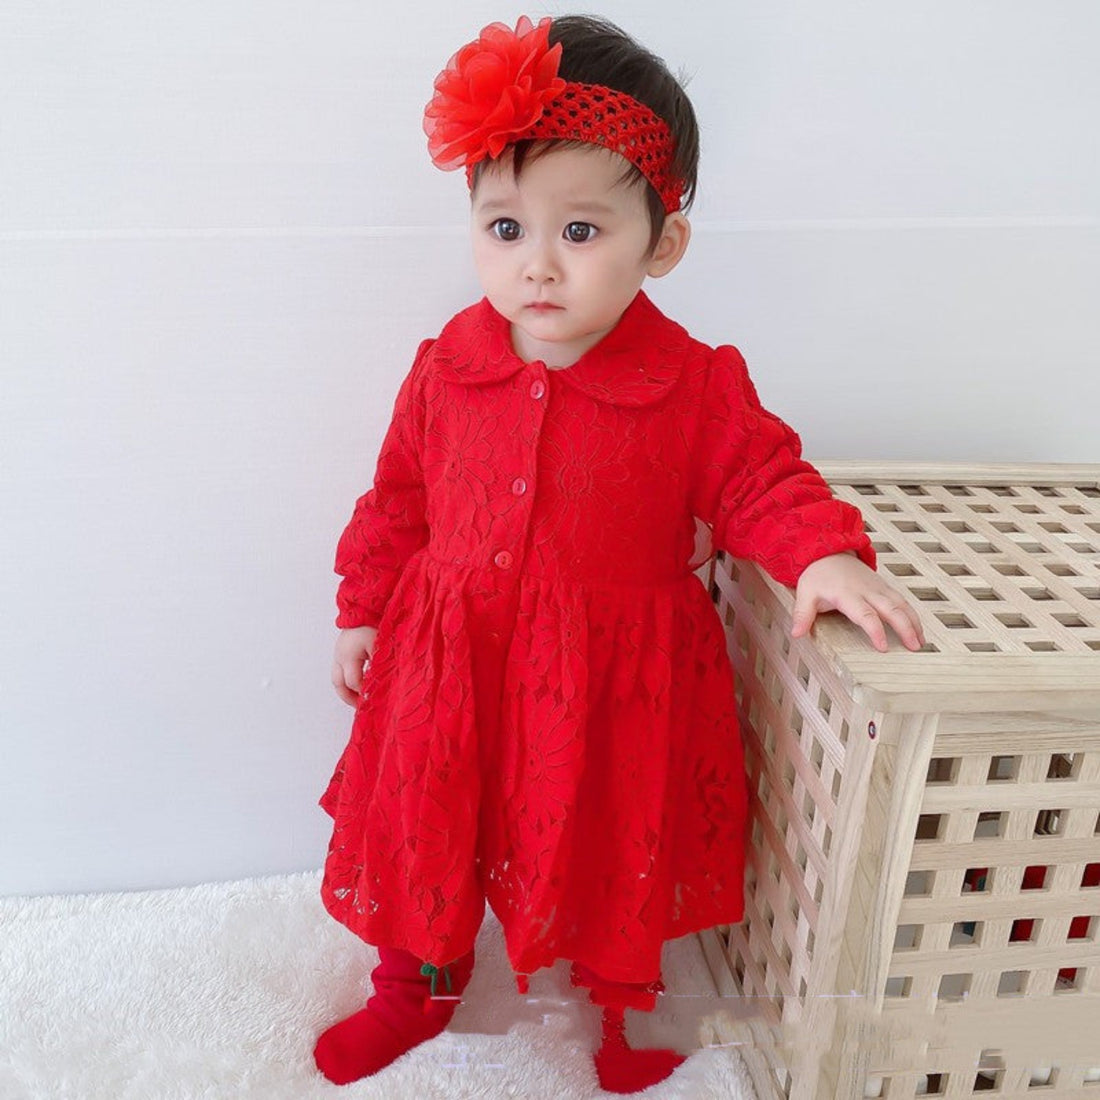 Lace detail on a red newborn baby girl dress, highlighting its intricate design.